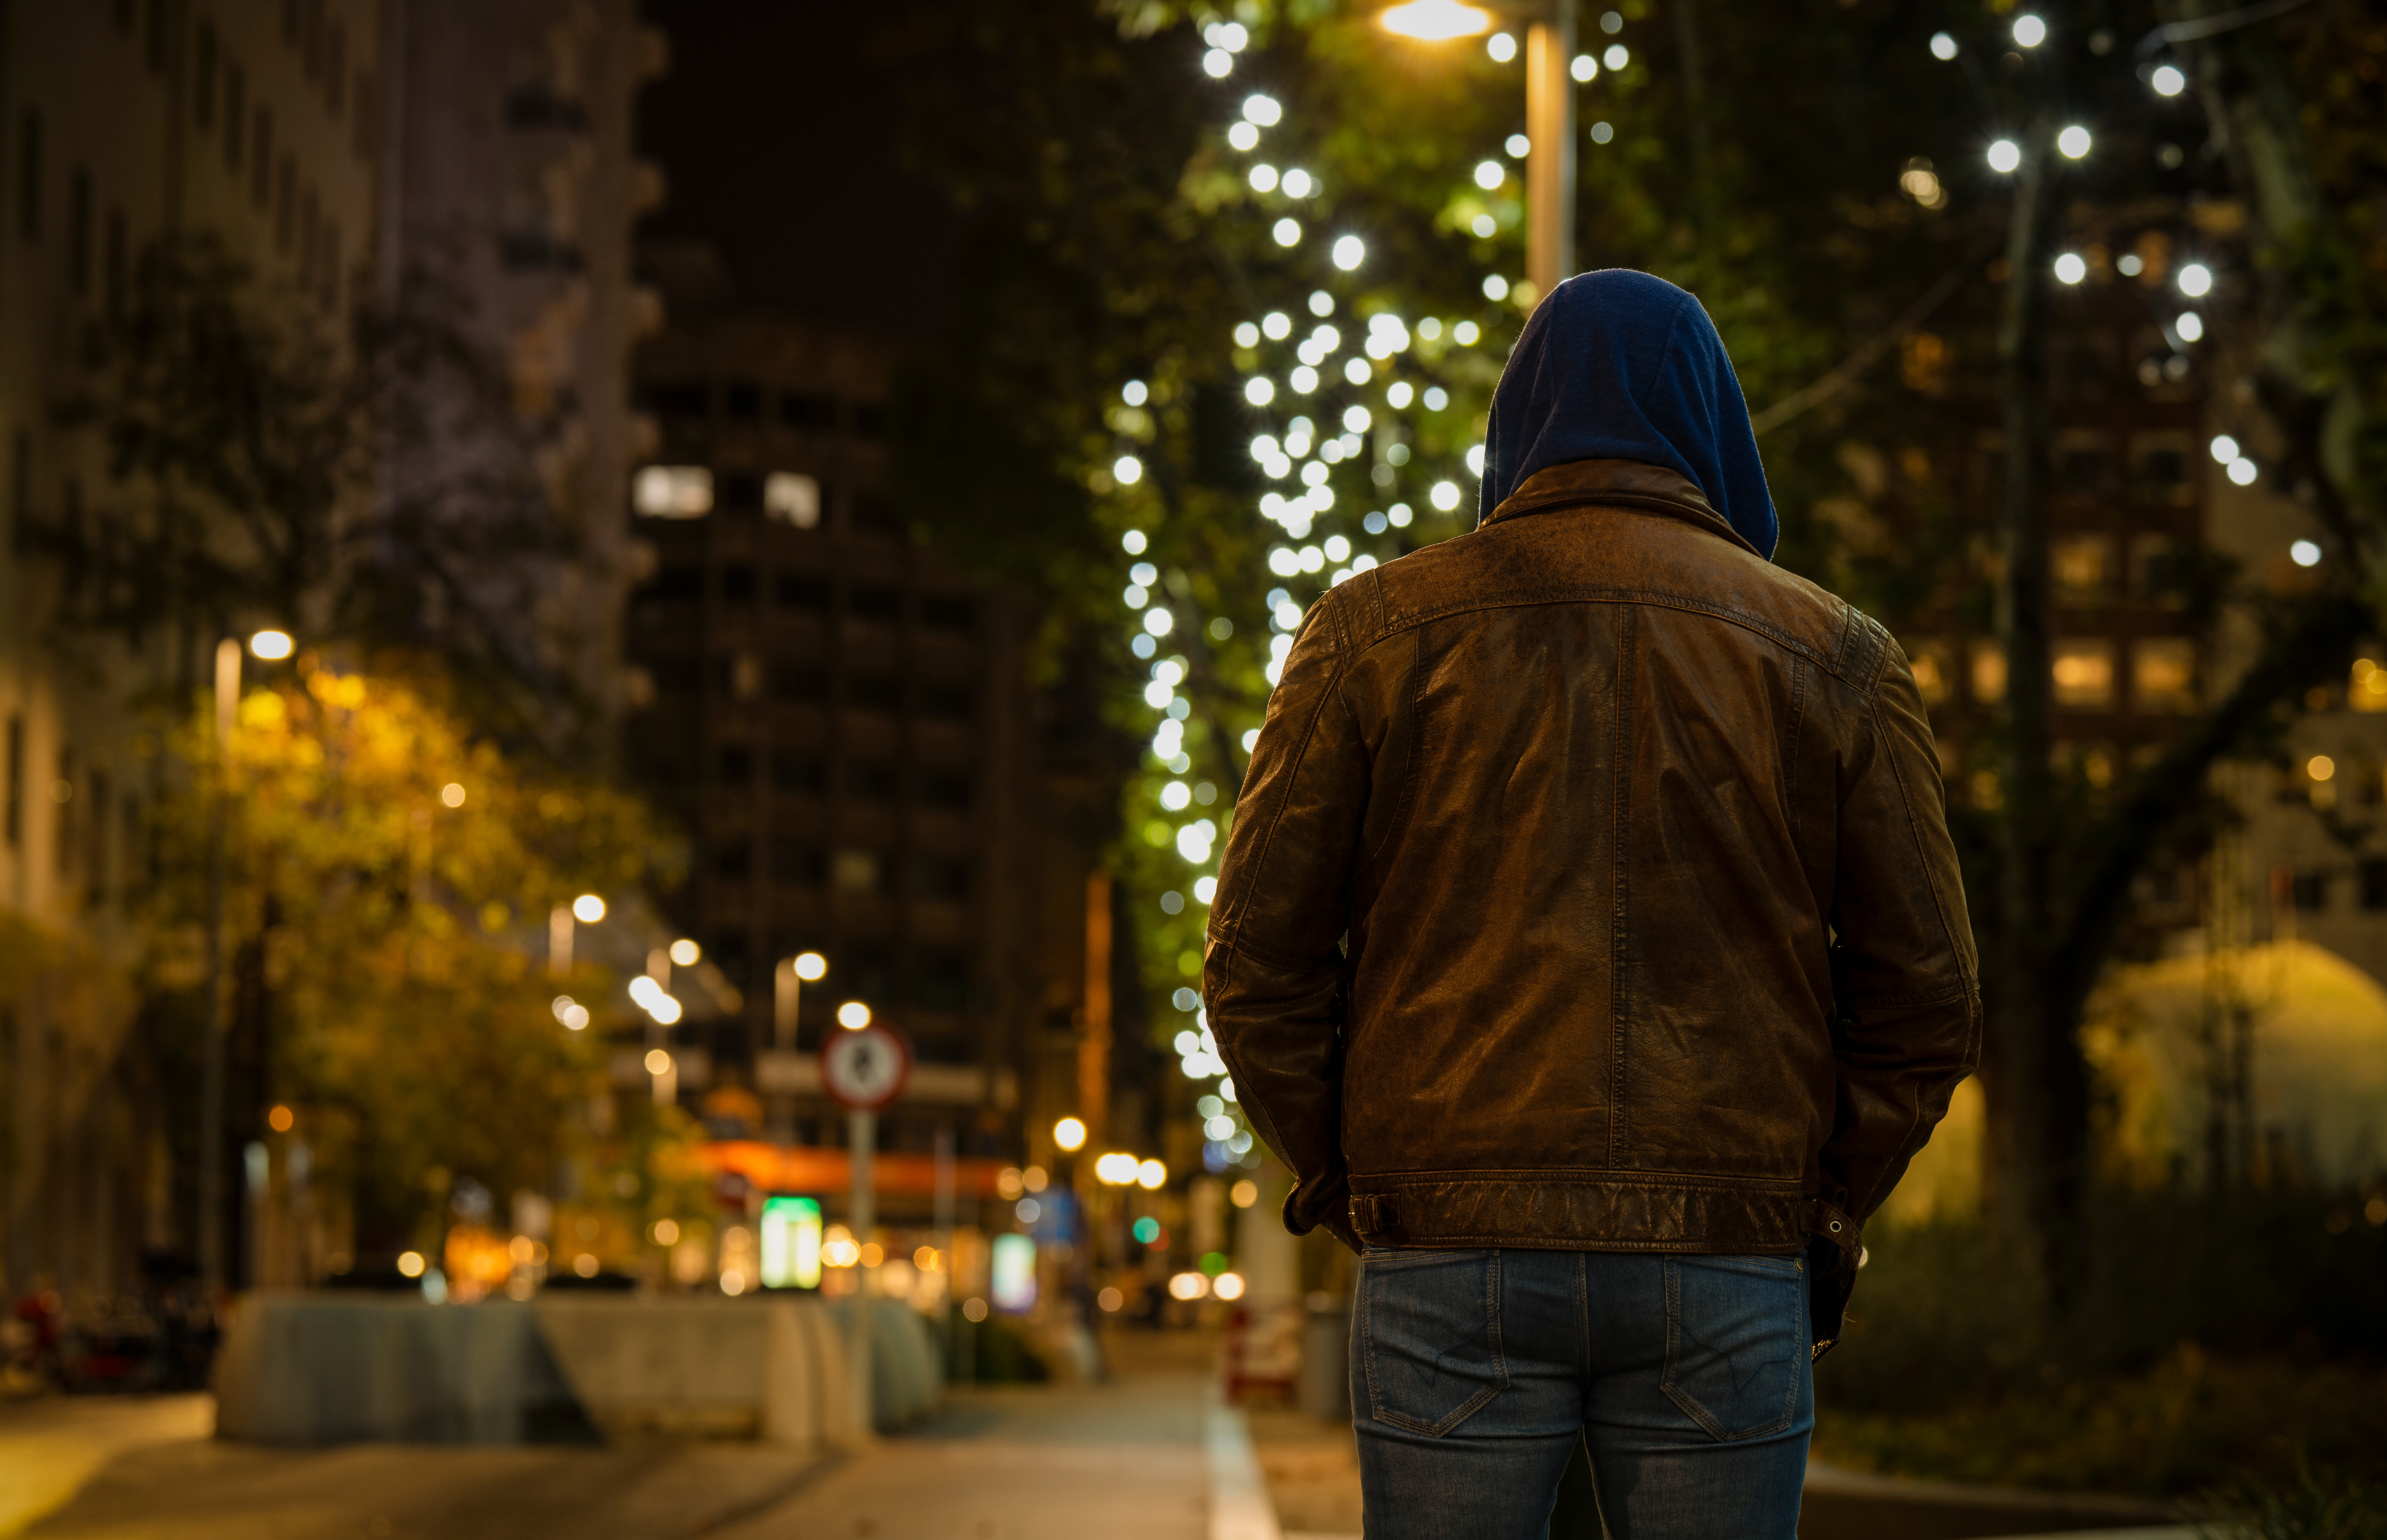 Rear view of a man on the street at night | Source: Shutterstock